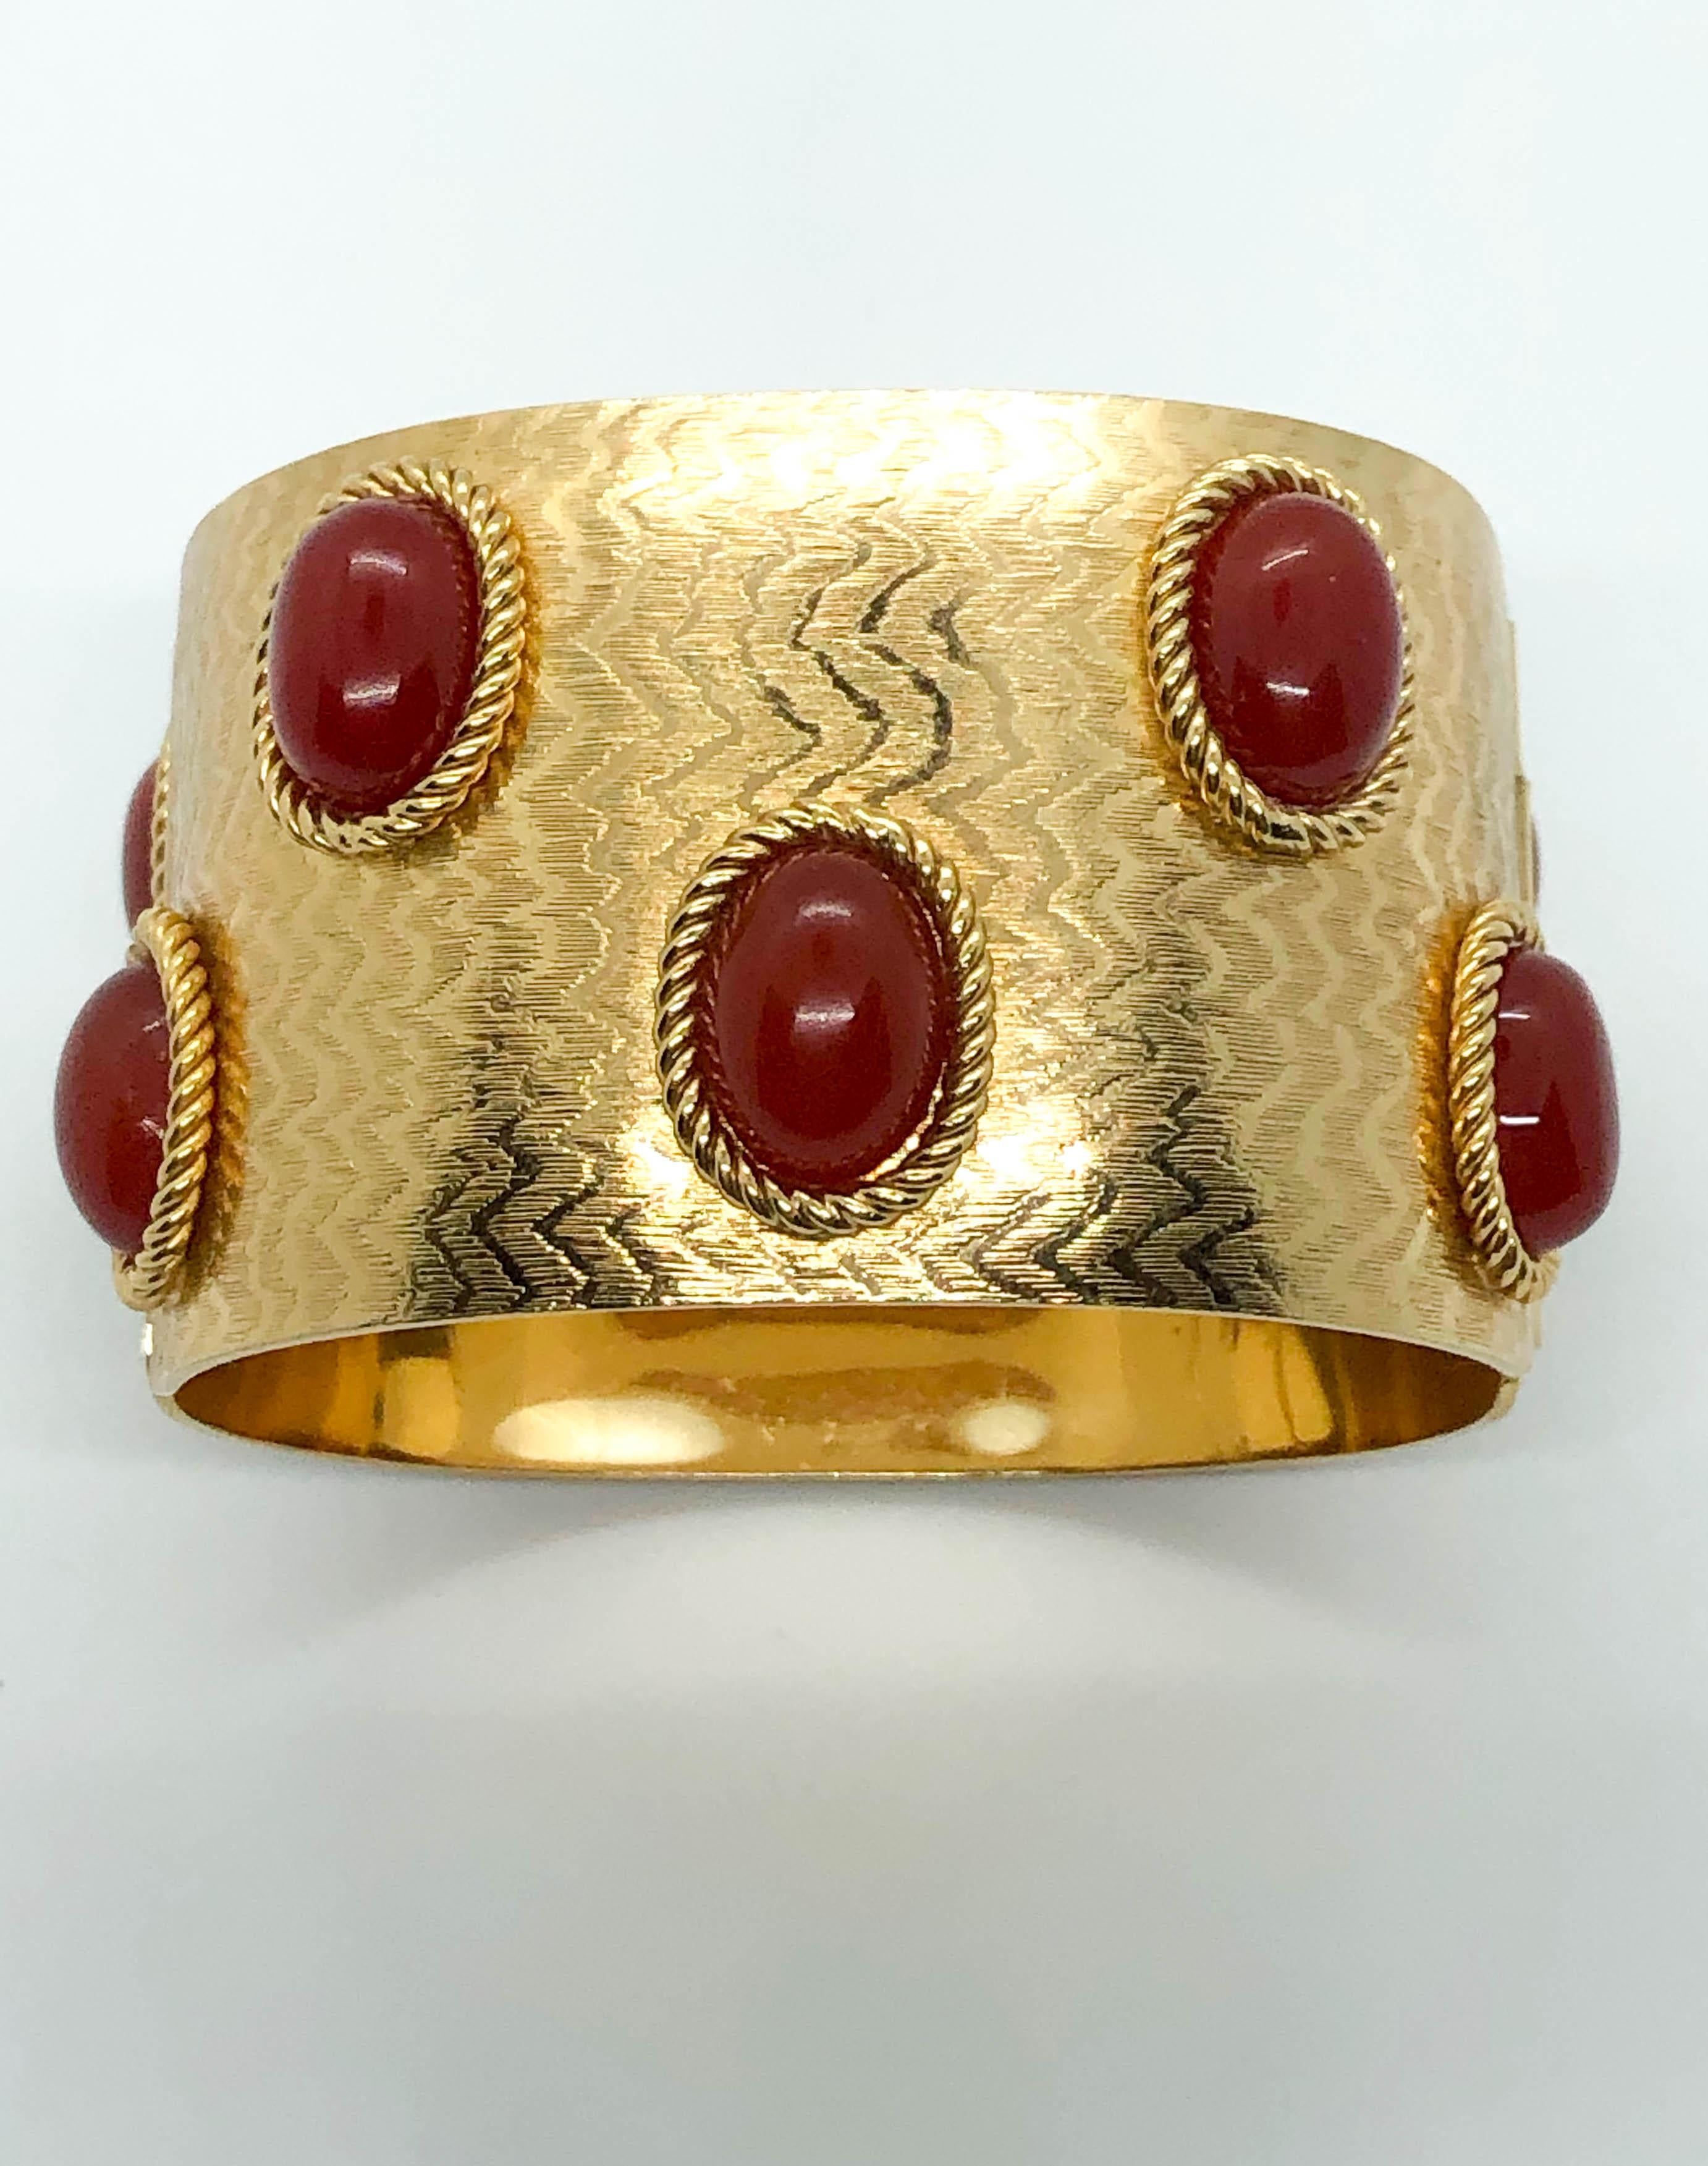 1968 Dior Gold-Plated Cuff Bracelet Embellished with Faux Amber Beads For Sale 2